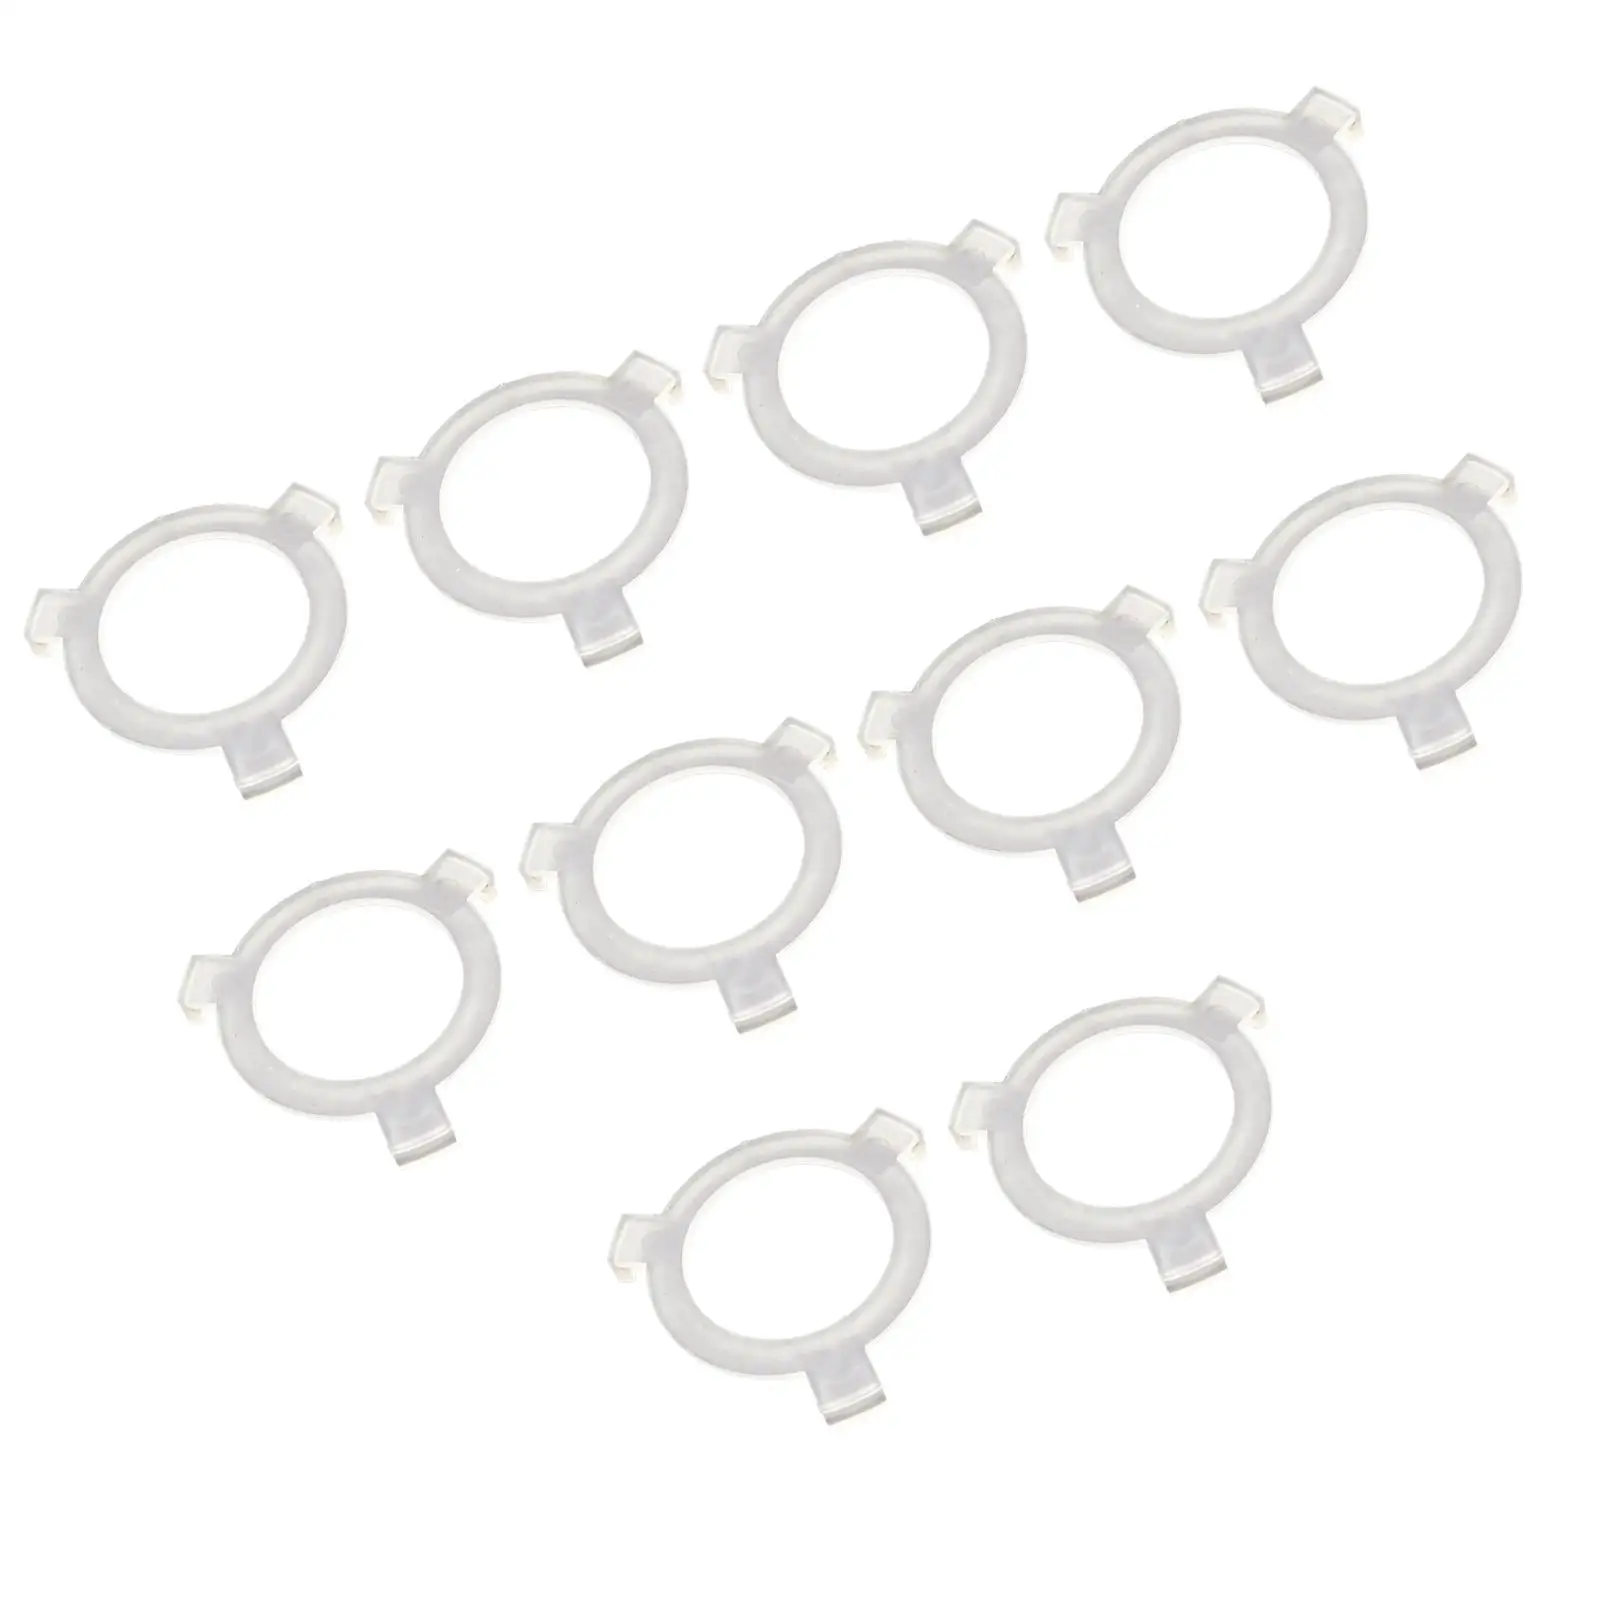 10 Pieces E27 to E26 Light Holder Converter Lampshade Adapter Washer Lighting Accessory